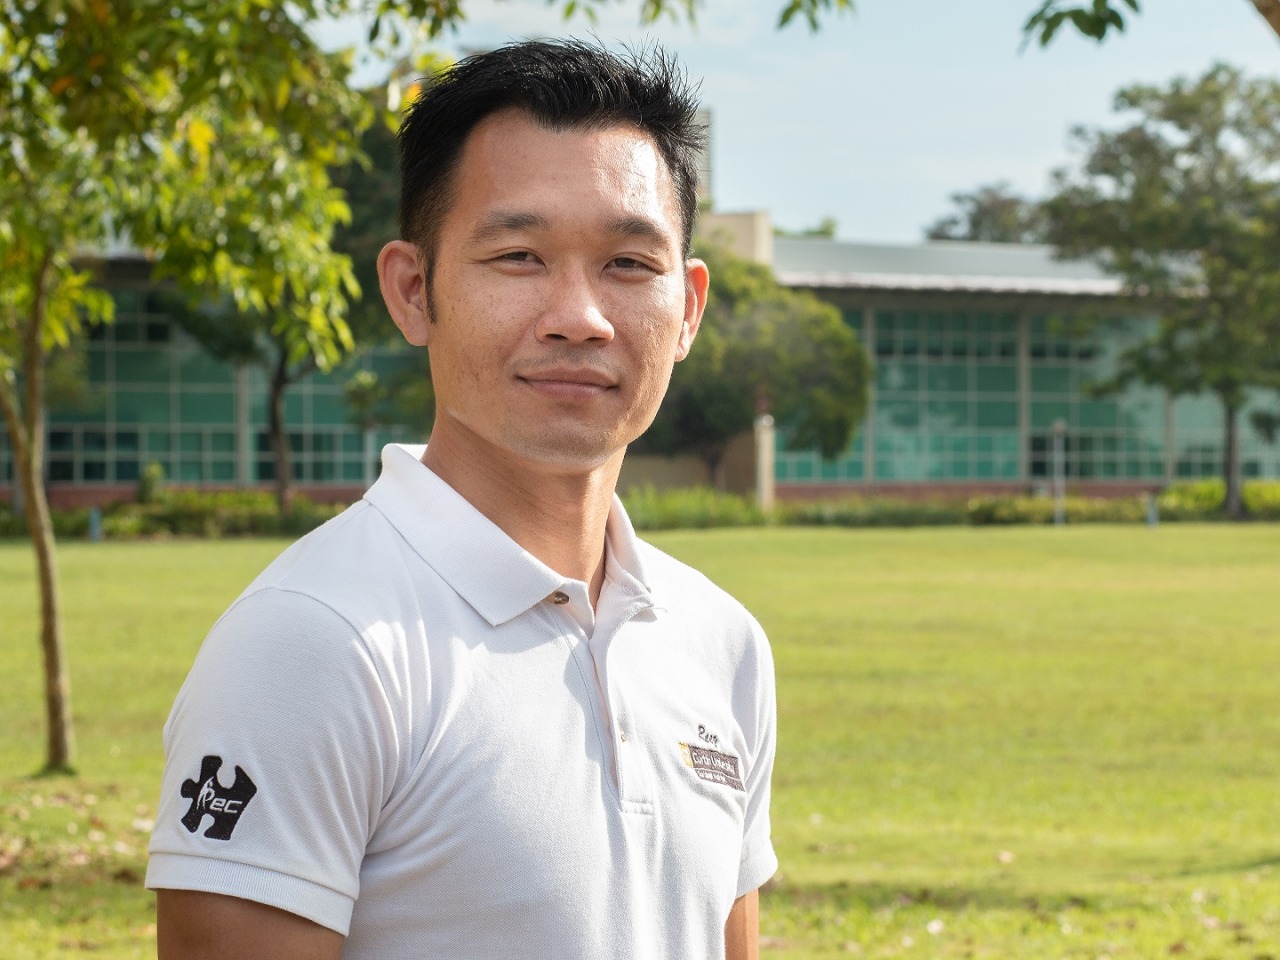 “I remember when I first started working at Curtin Malaysia and I was sitting at the receptionist desk in the old gym which was only the size of about two bathrooms. As a fitness instructor, consultant and officer, I longed to see the gym expanded...